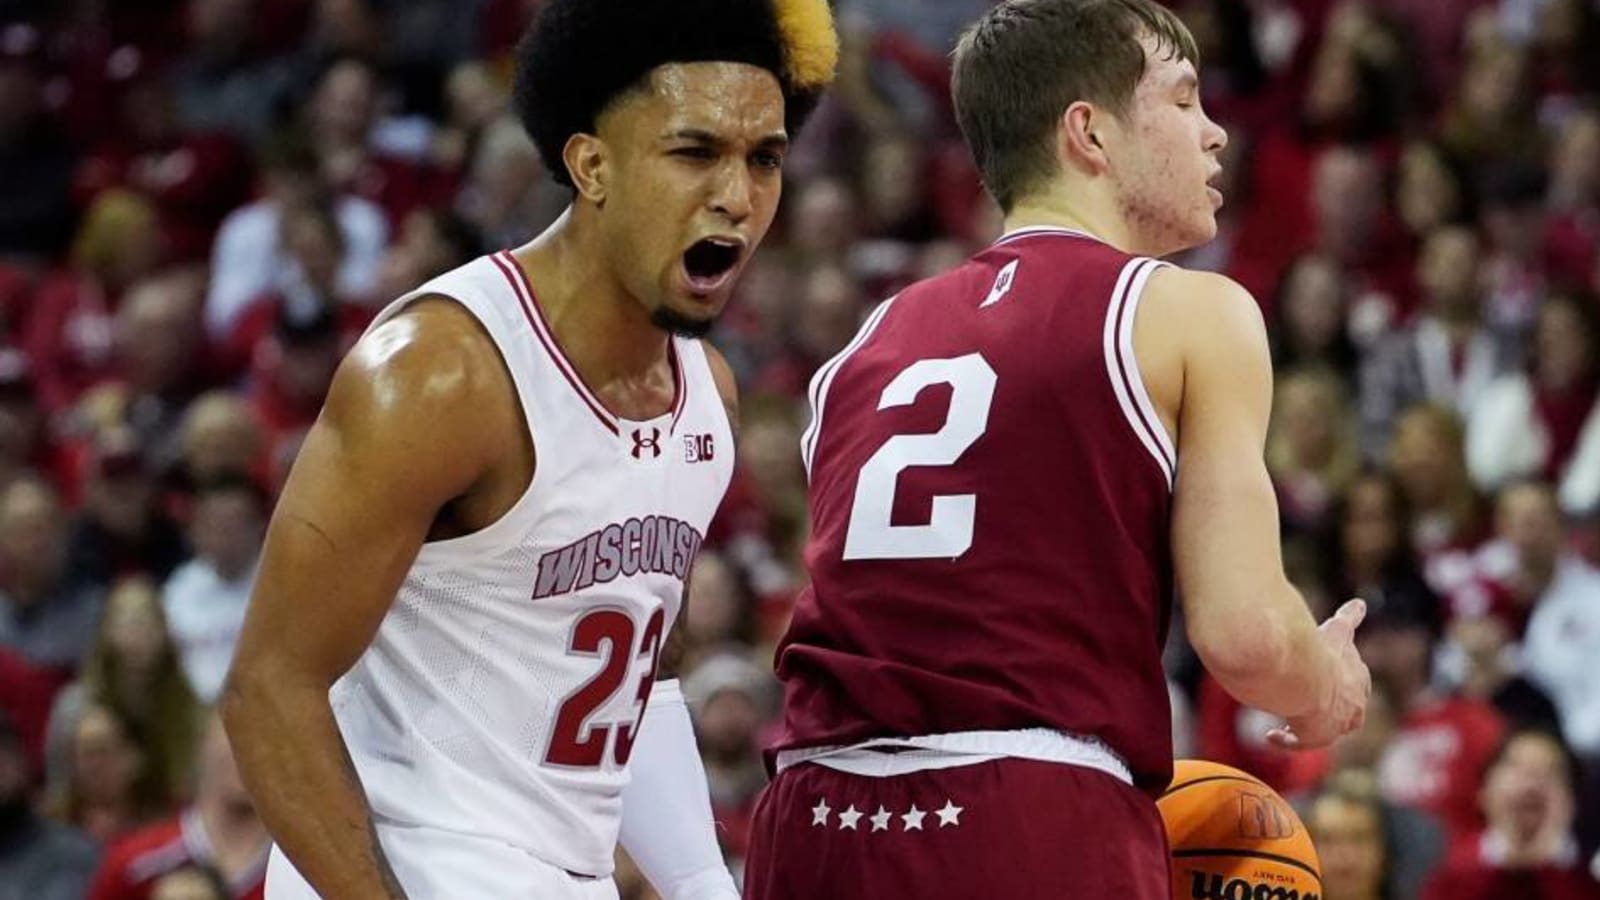 Meet the Opponent: Wisconsin Looking To End Brutal February on High Note at Indiana